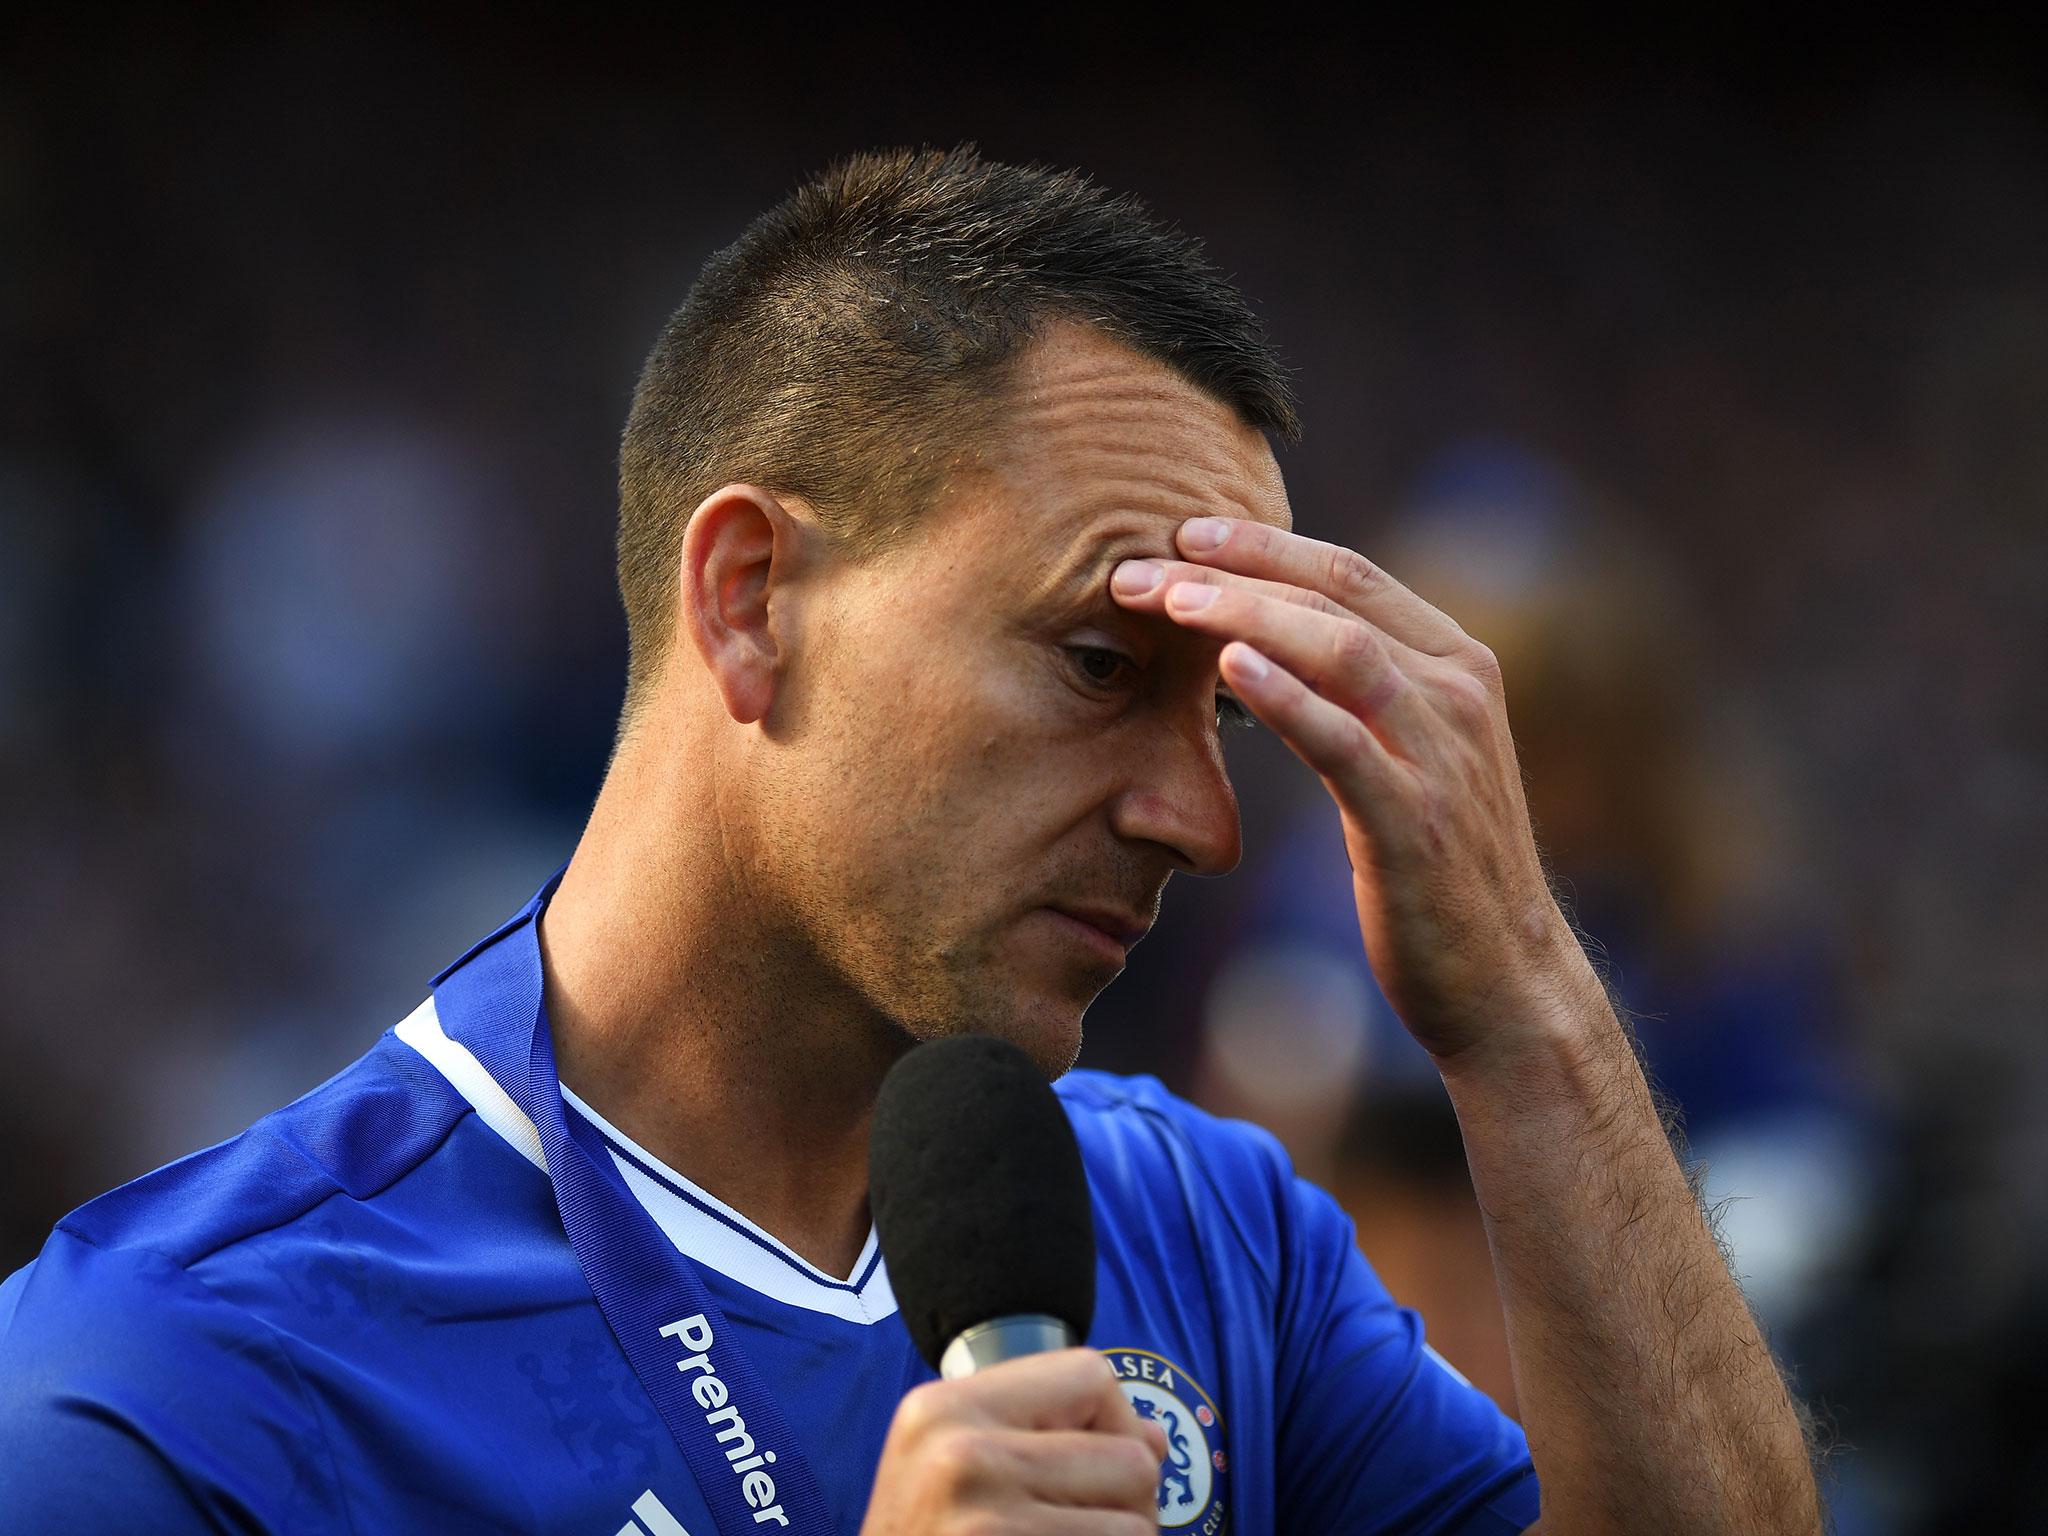 Questions have been raised if someone with inside knowledge passed on details of Terry's planned substitution